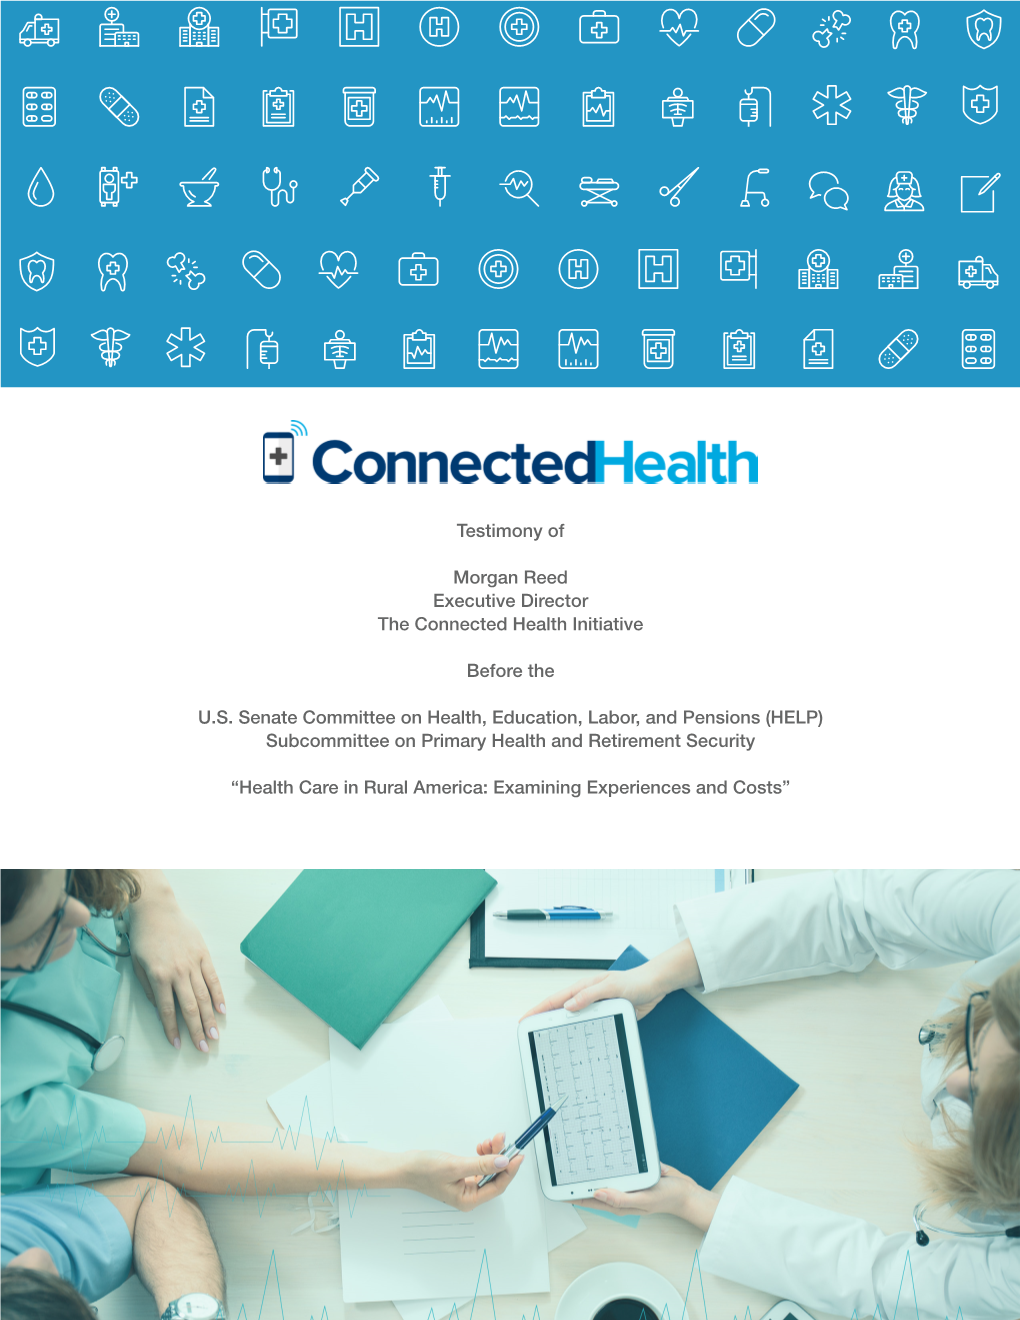 Connected Health Initiative Testimony On